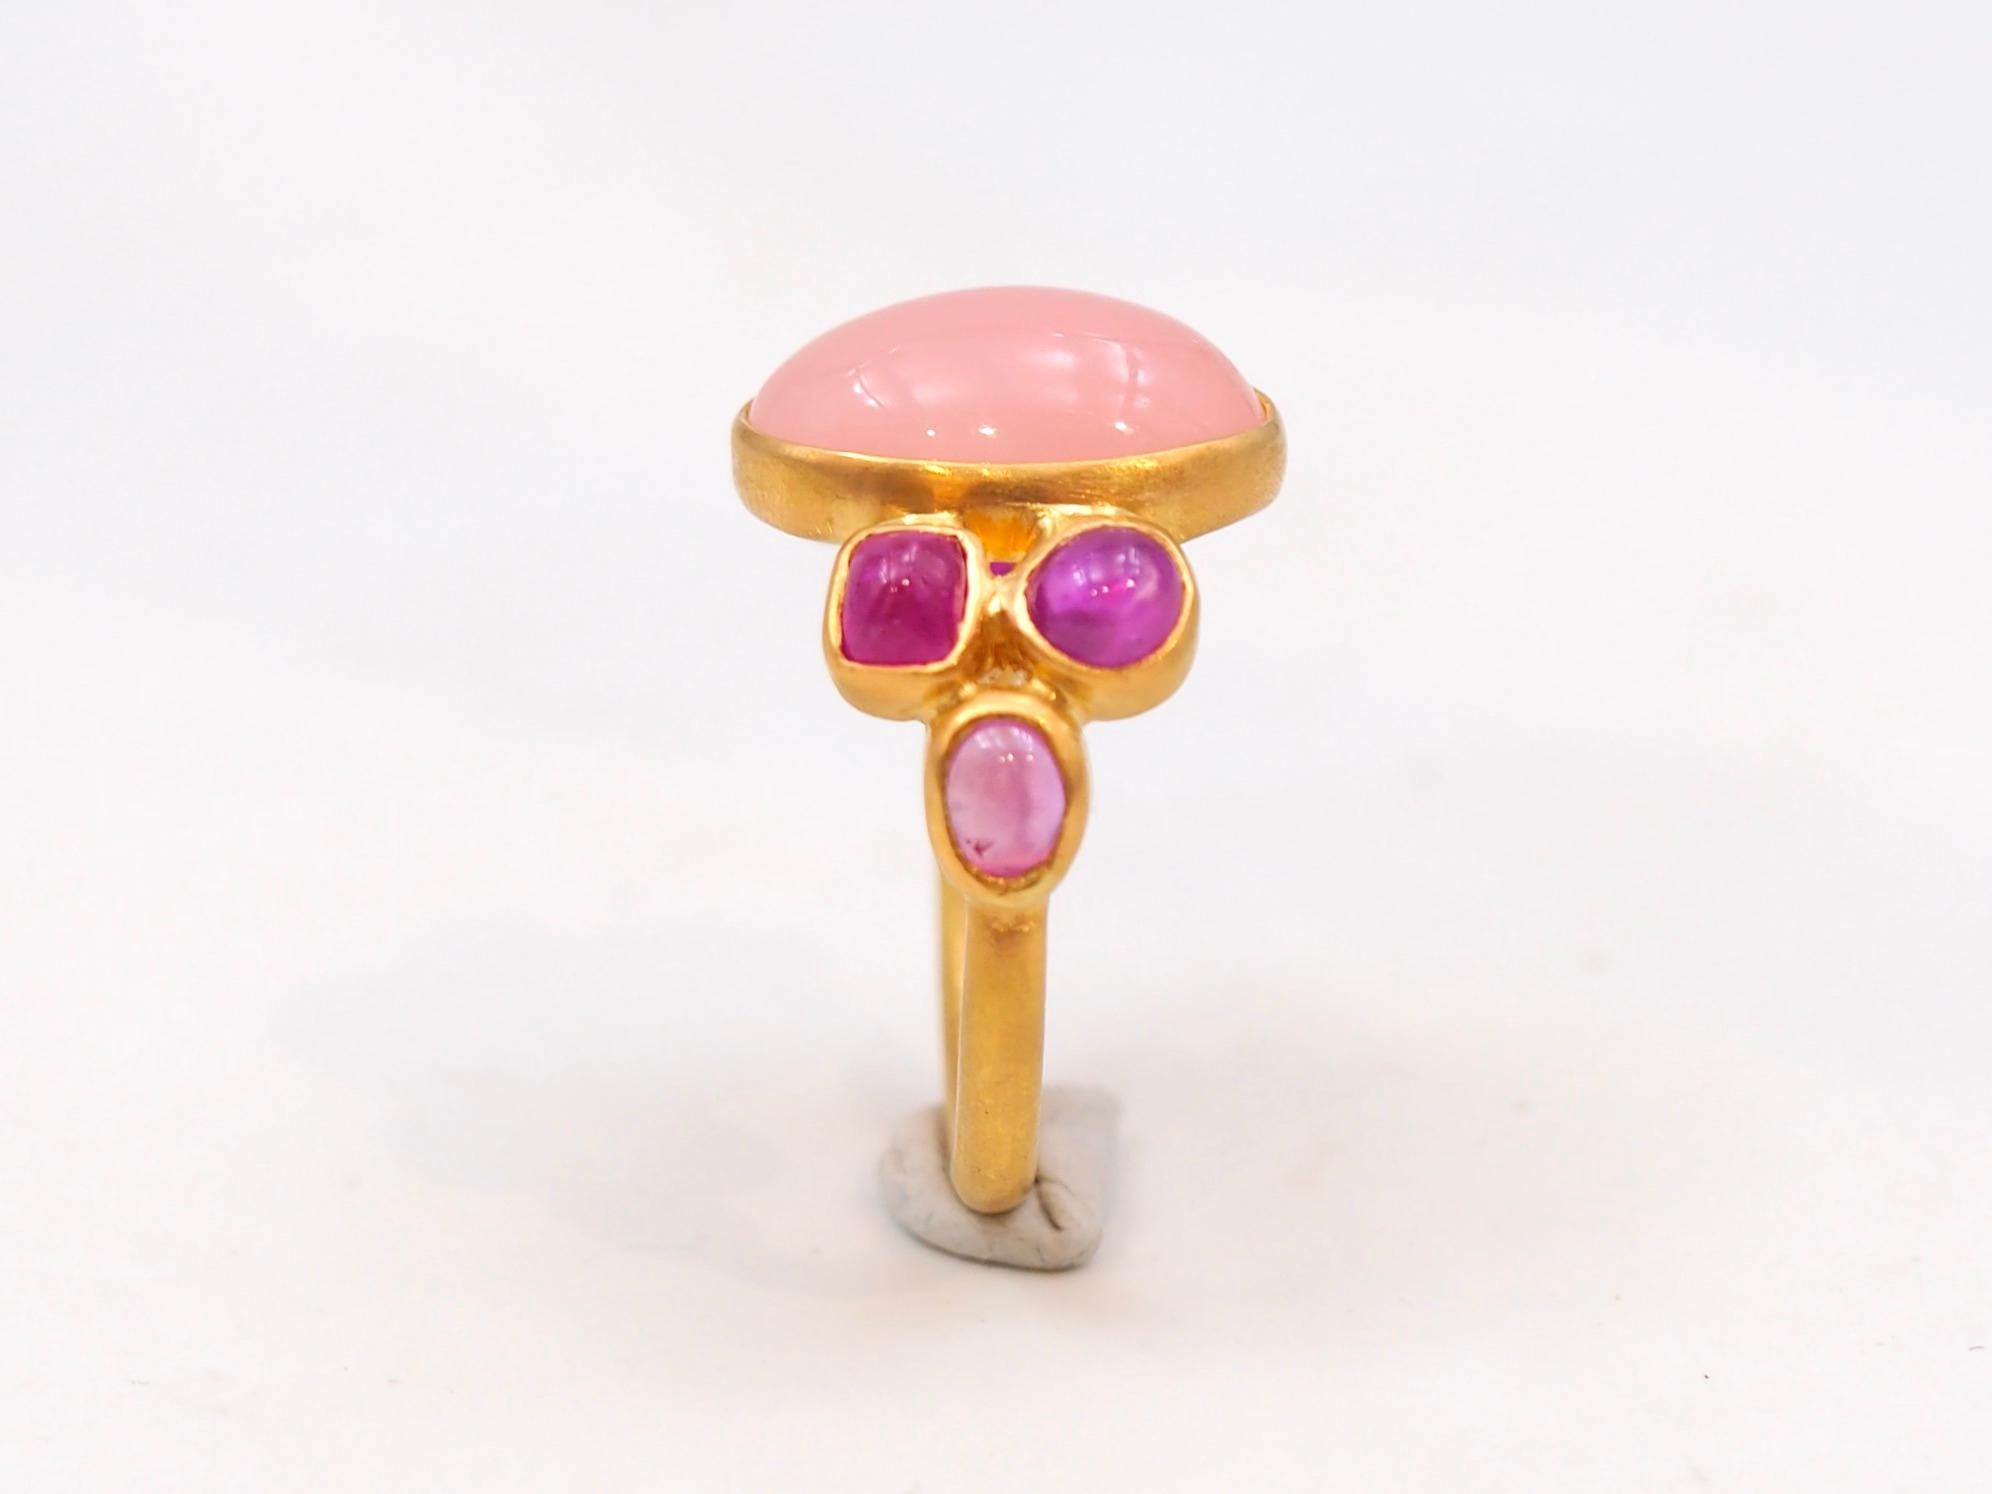 Scrives 5.25 Ct Peach Chalcedony 3.06 Ct Pink sapphire Cabochon 22 Kt Gold Ring In New Condition For Sale In Paris, Paris